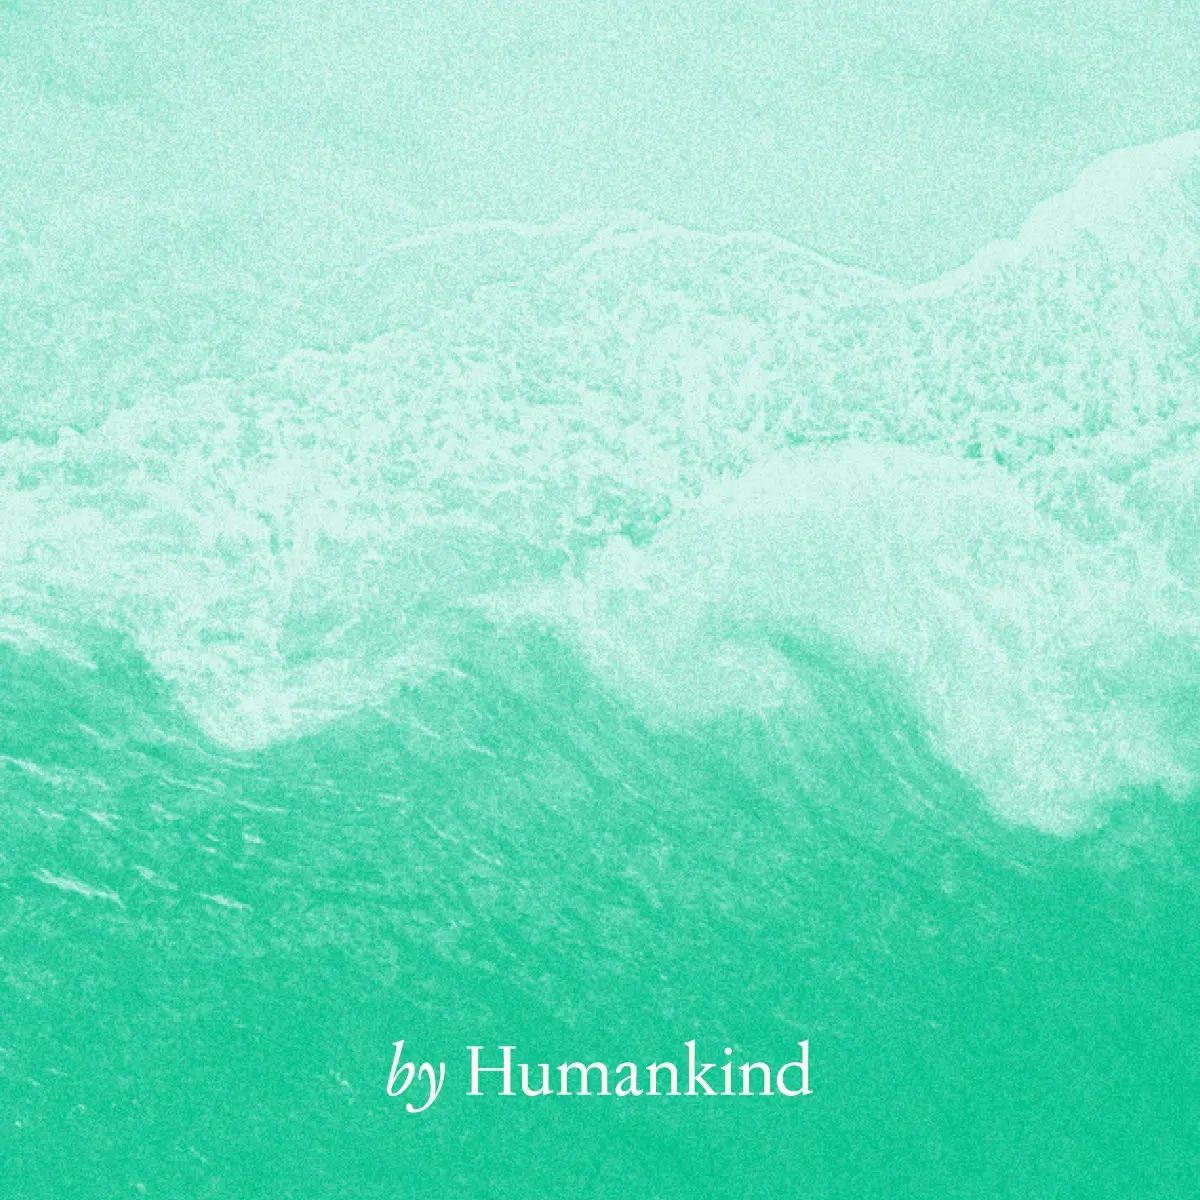 link card for the project by Humankind showing a wave and the by Humankind logo